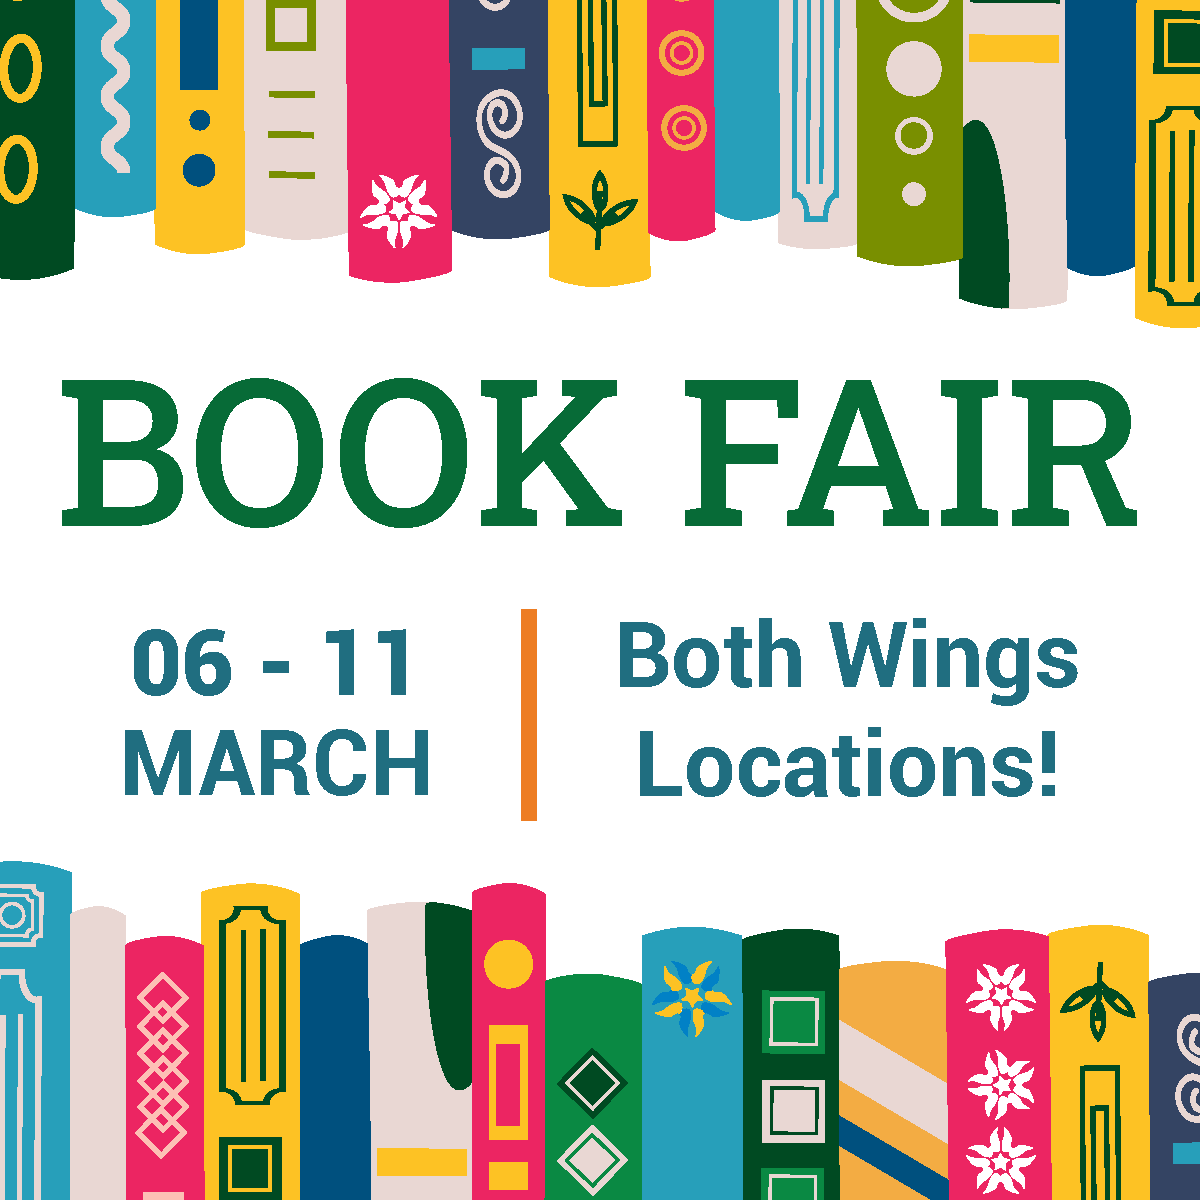 Wings Book Fair benefits our care and camp program by providing new books (50% of sales goes to purchasing books!).